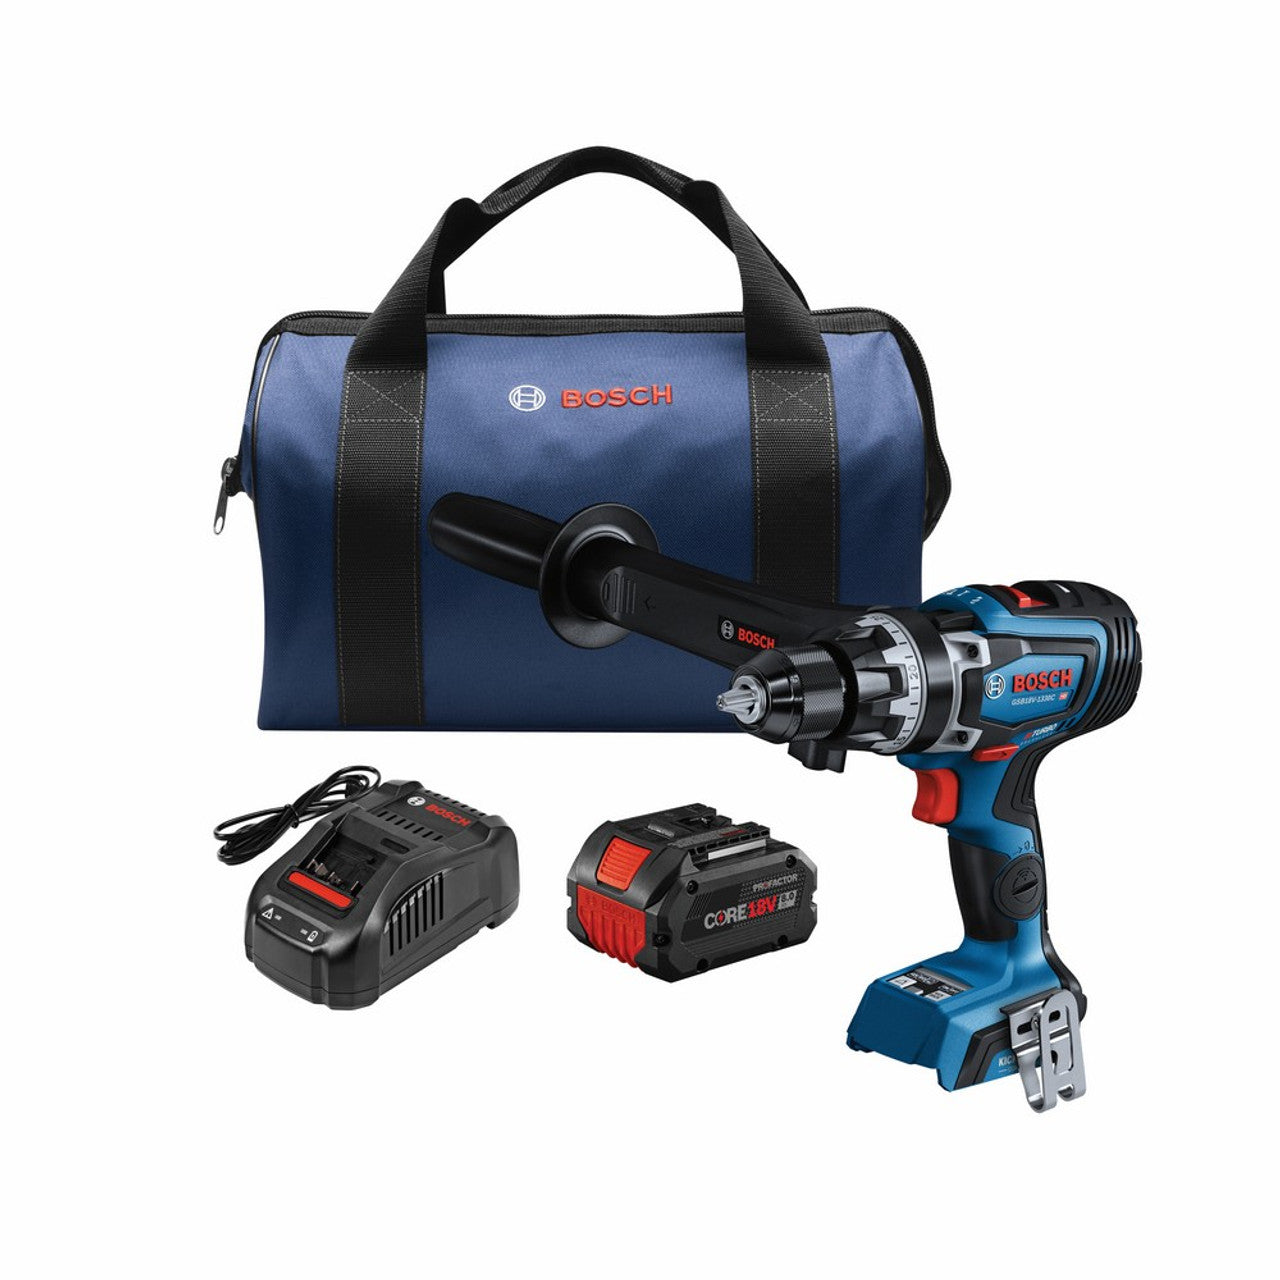 Bosch GSB18V-1330CB14 Profactor 18V Connected-Ready 1/2" Hammer Drill/Driver Kit with 8 Ah Battery